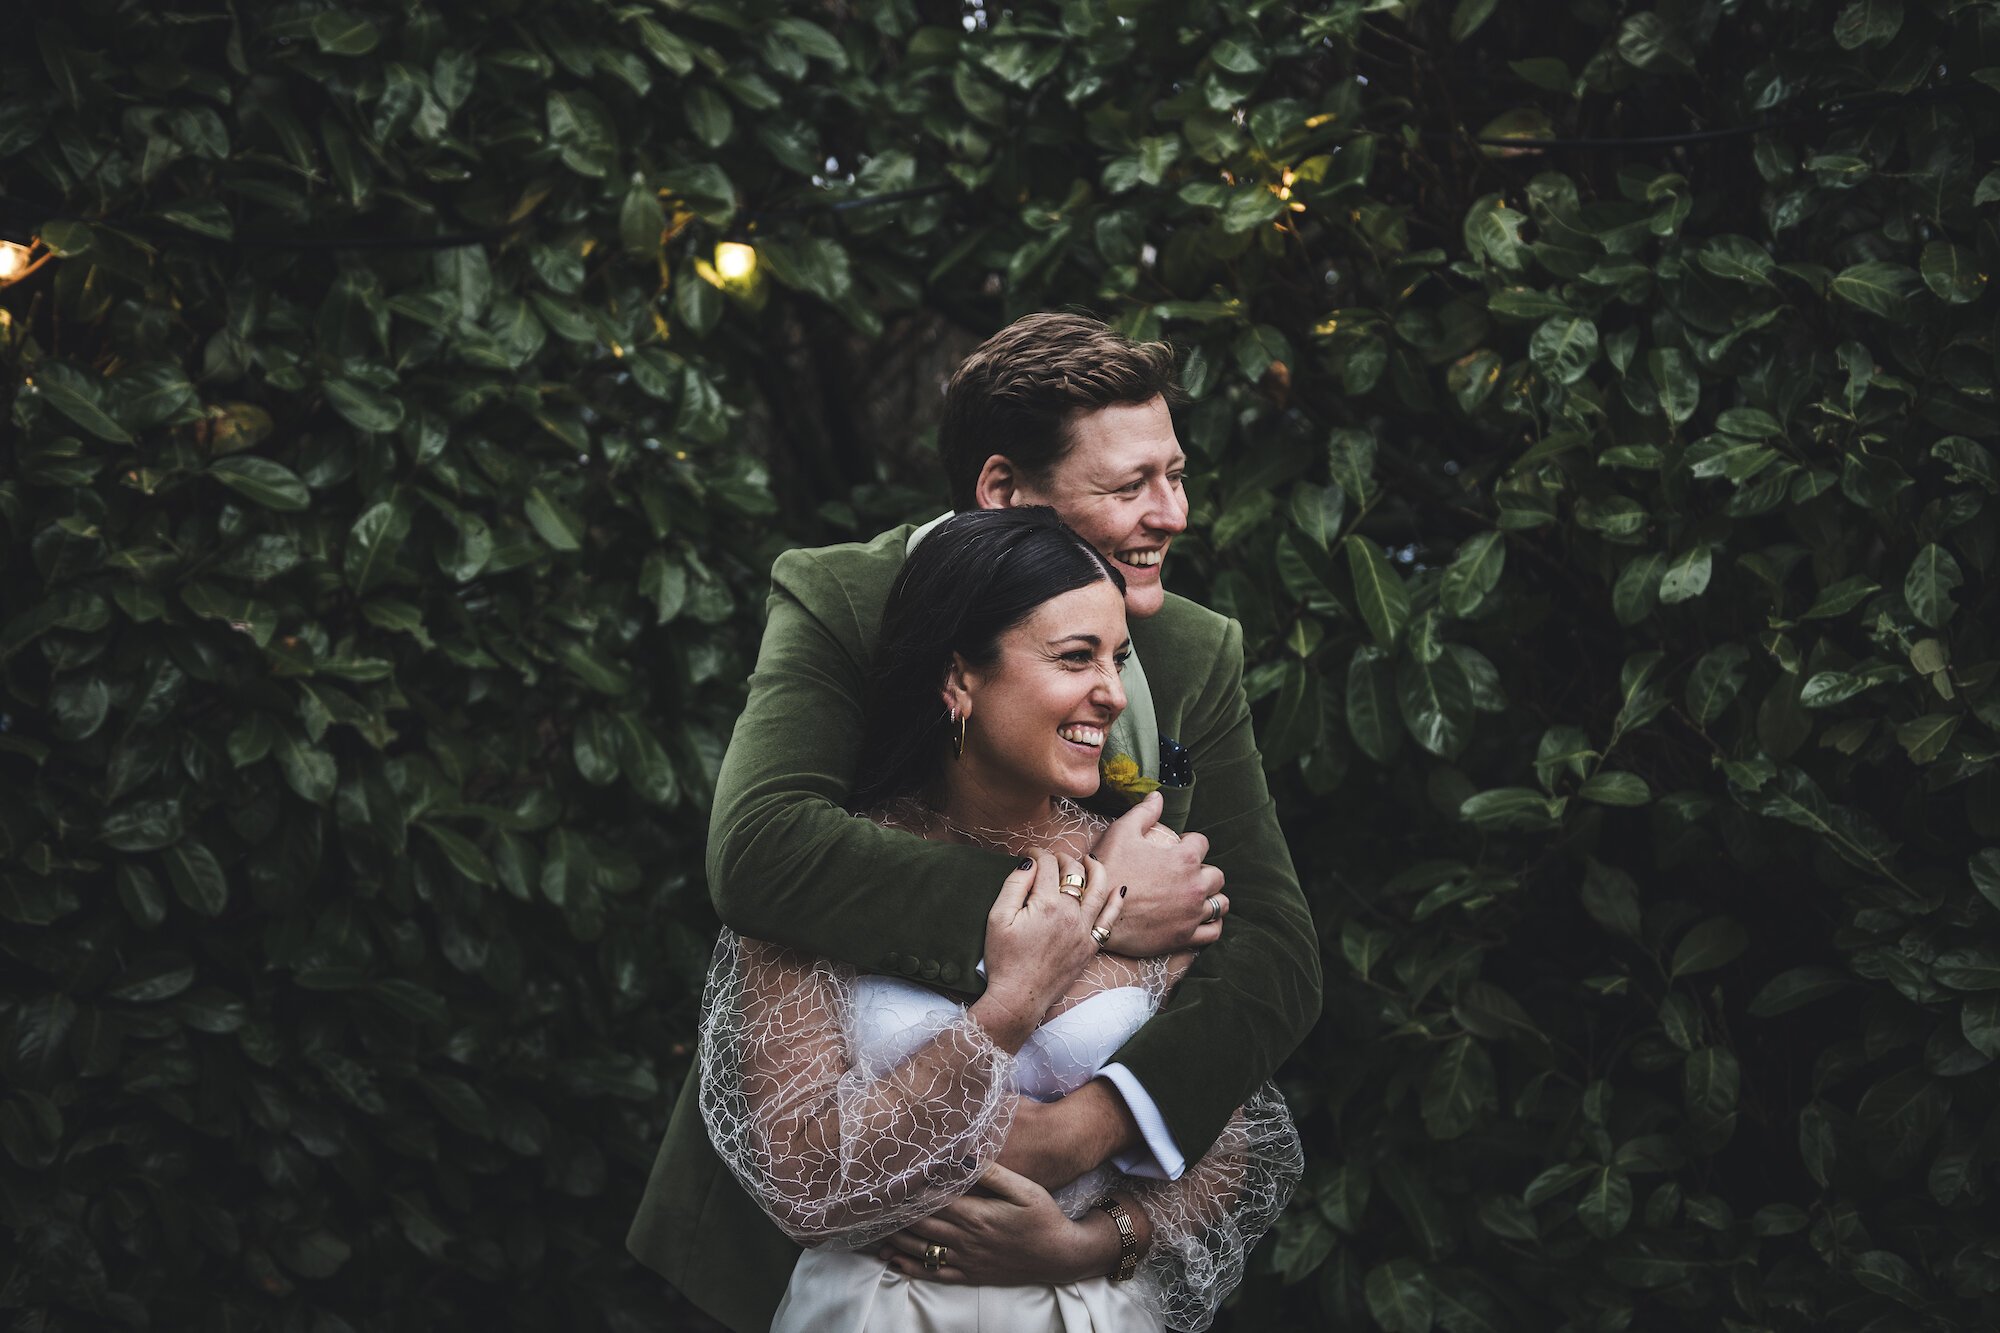 Beautiful bride Megan wore a wedding outfit by Halfpenny London | Image by Ed O'Mahoney